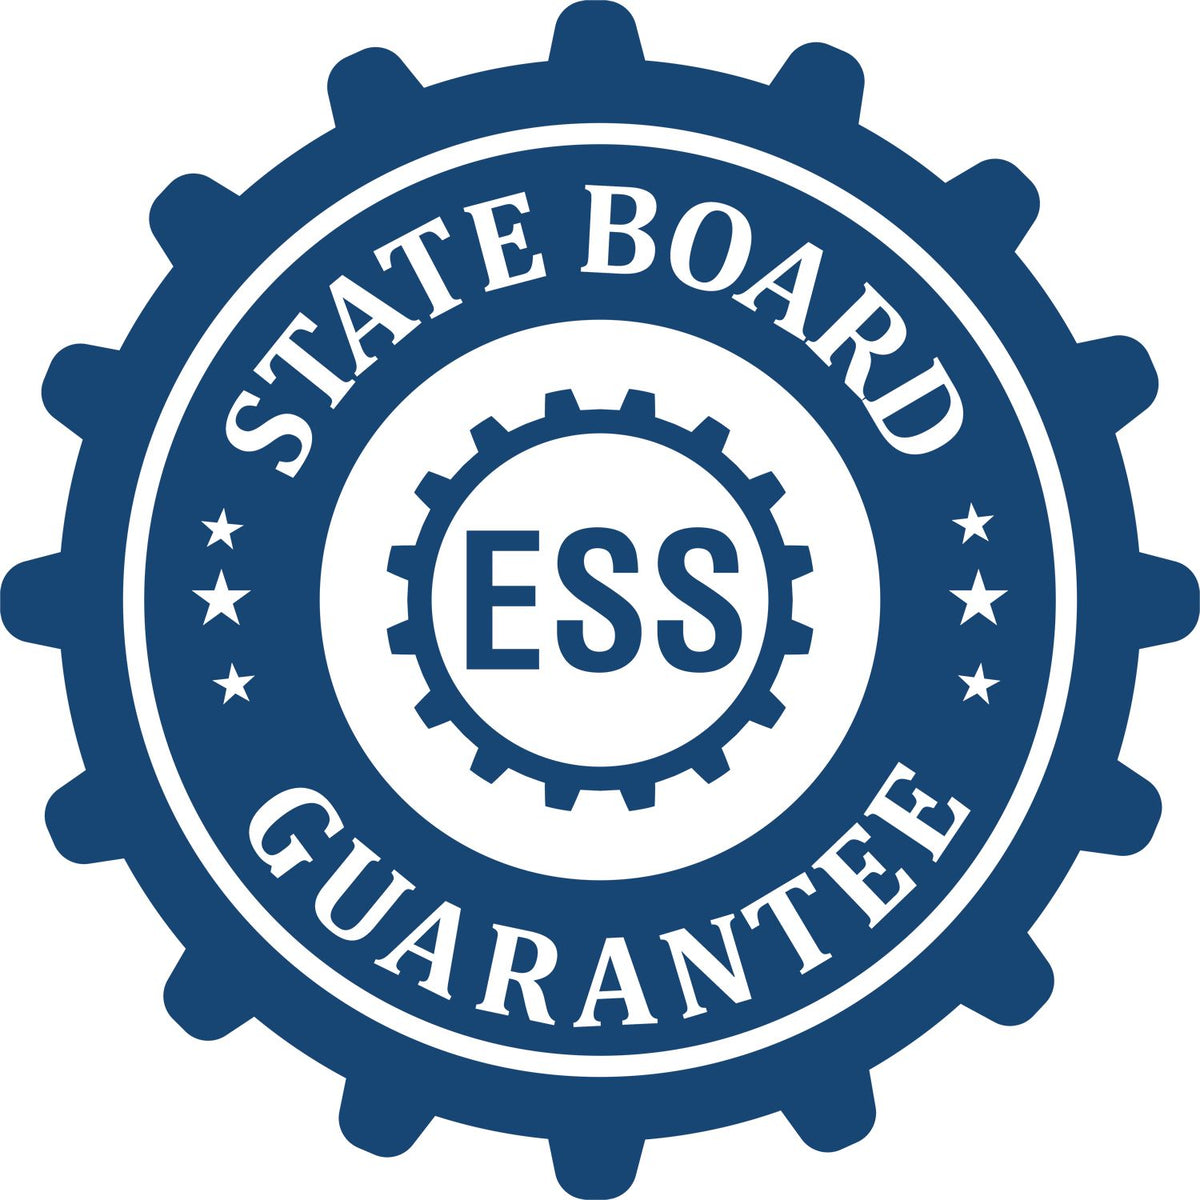 An emblem in a gear shape illustrating a state board guarantee for the Heavy Duty Cast Iron New Jersey Architect Embosser product.